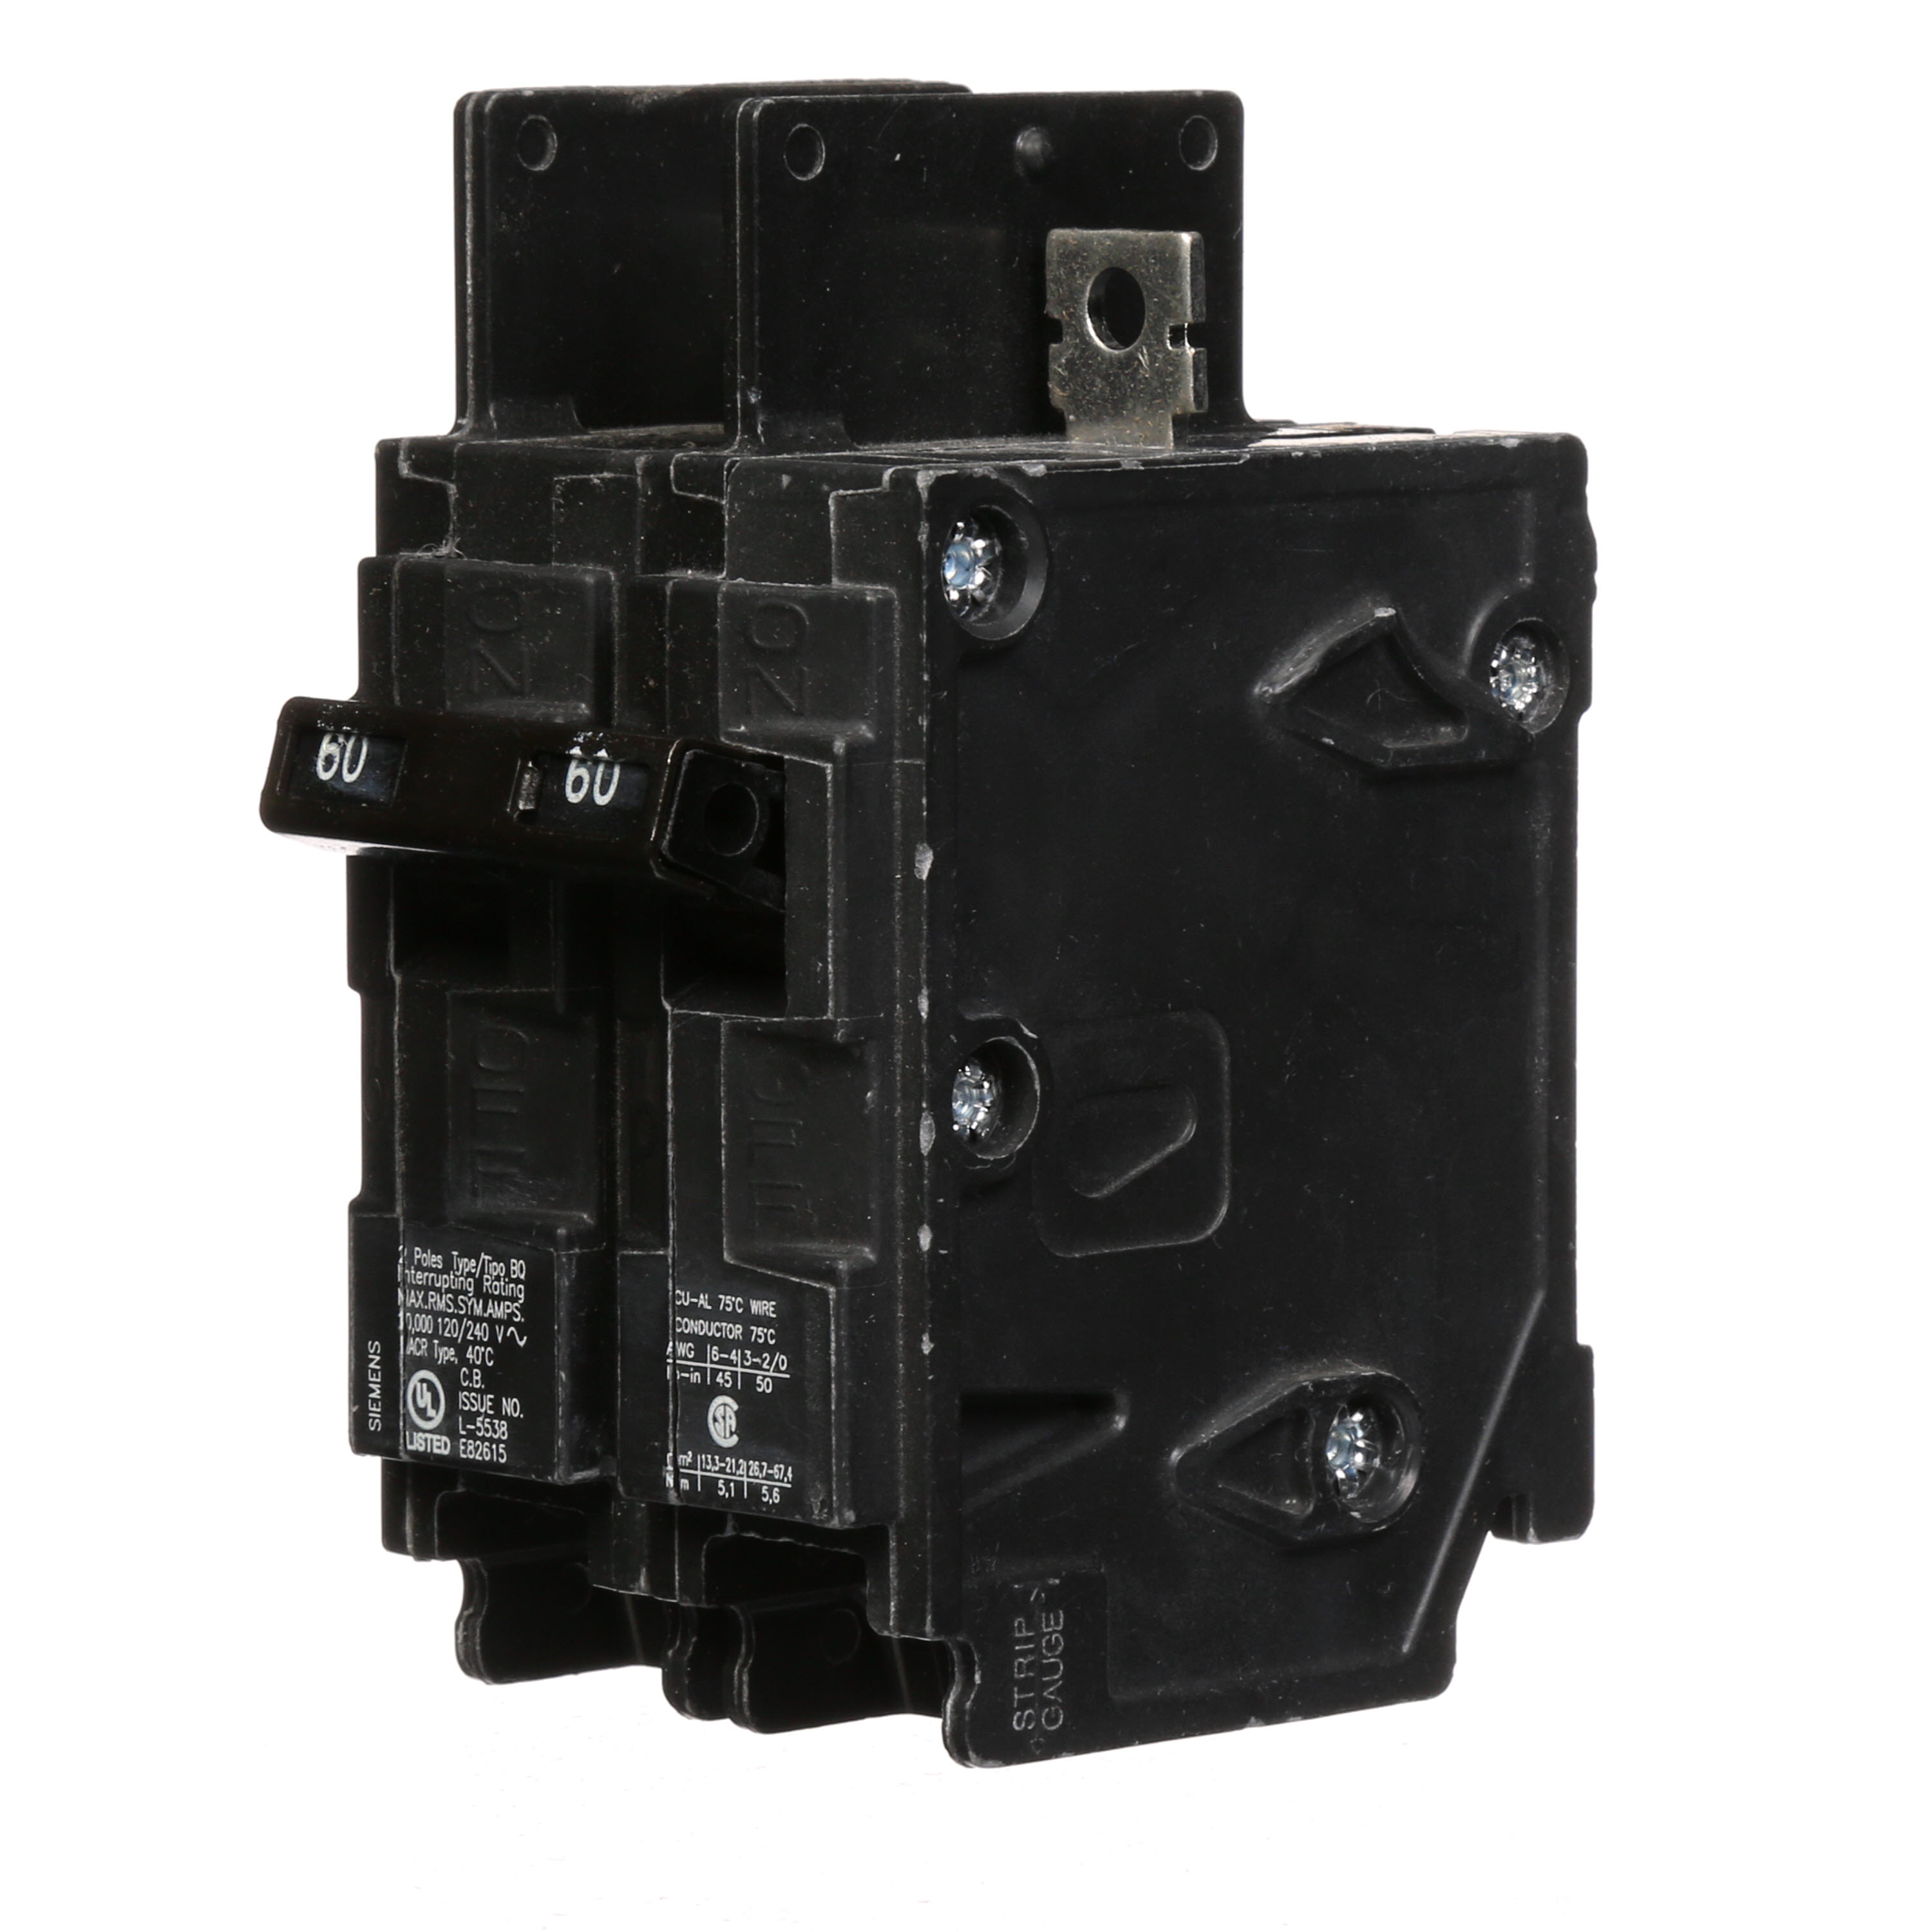 Siemens Low Voltage Molded Case Circuit Breakers General Purpose MCCBs - Type BQ, 2-Pole, 120/240VAC are Circuit Protection Molded Case Circuit Breakers. 2-Pole Common-Trip circuit breaker type BQ. Rated 120/240V (060A) (AIR 10 kA). Special features Load side lugs are included.